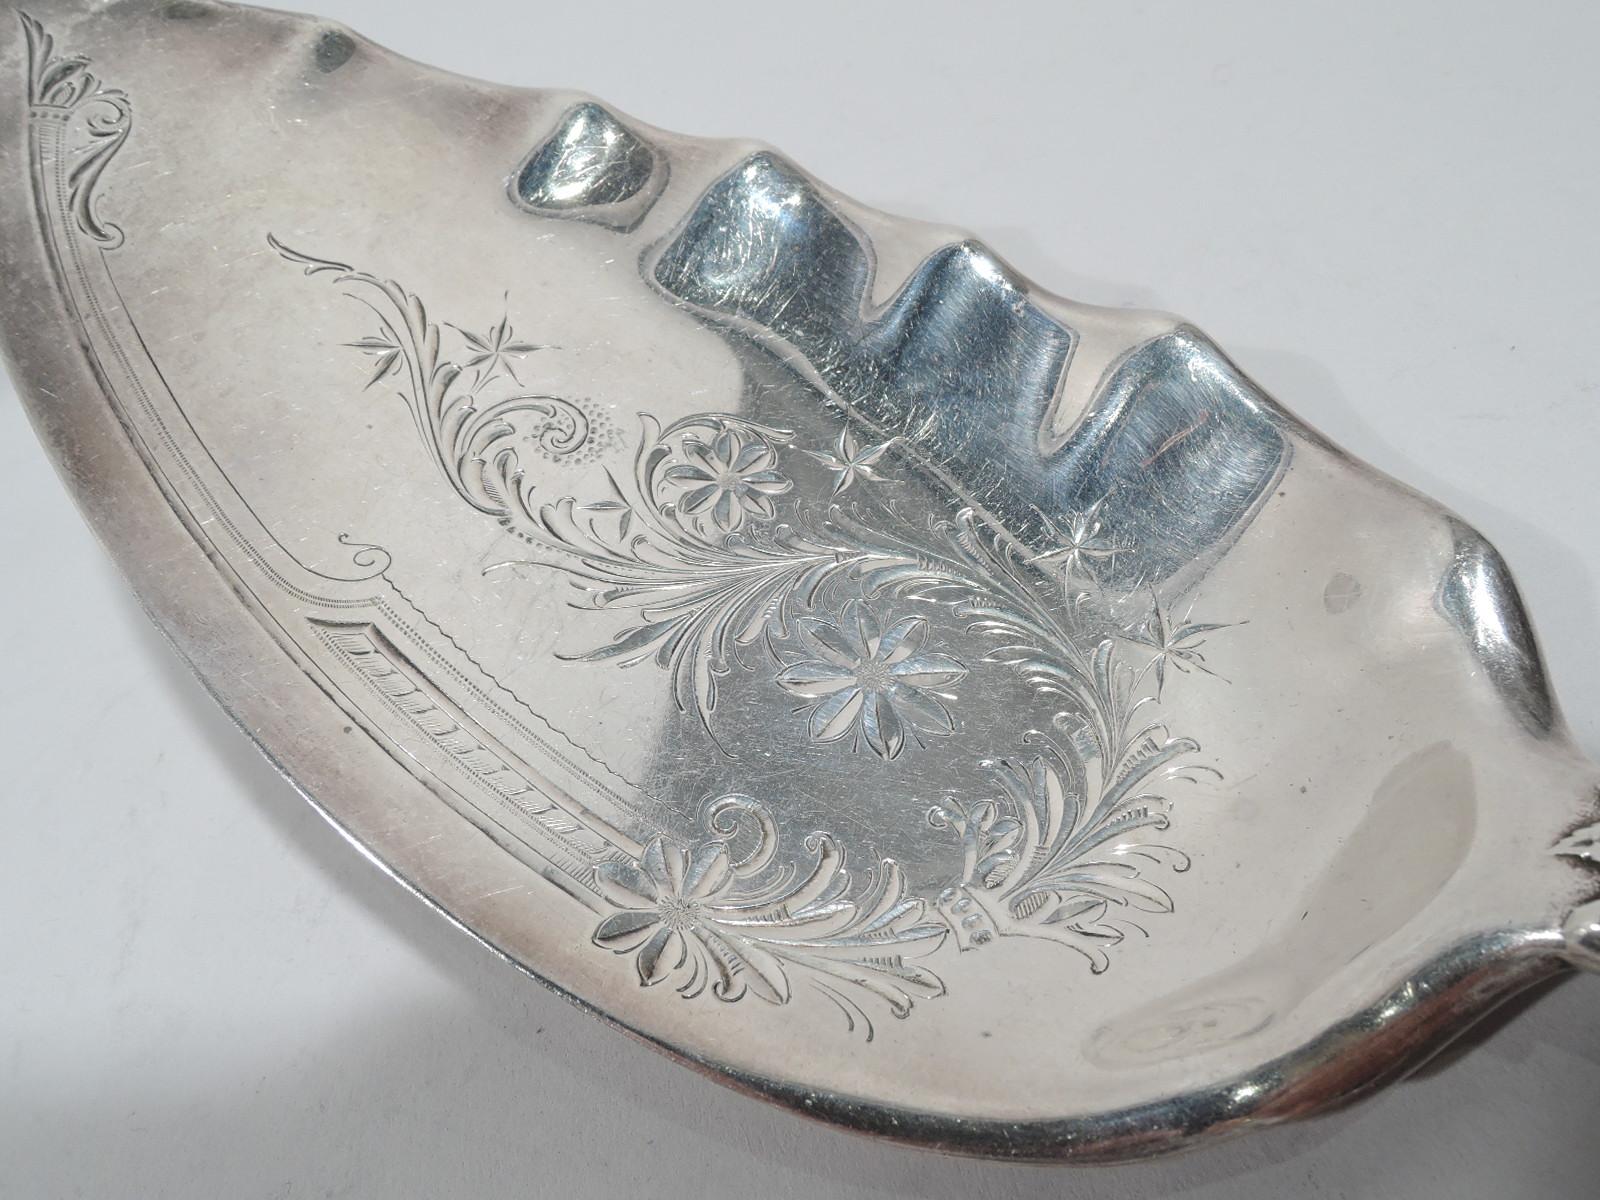 Cluny sterling silver fish server. Made by Gorham in Providence. Ovalish and crimped blade with engraved and brite-cut leaf and flower ornament. Handle tapering with dense flower heads as well as patera, beading, and volute scrolls in low relief. A